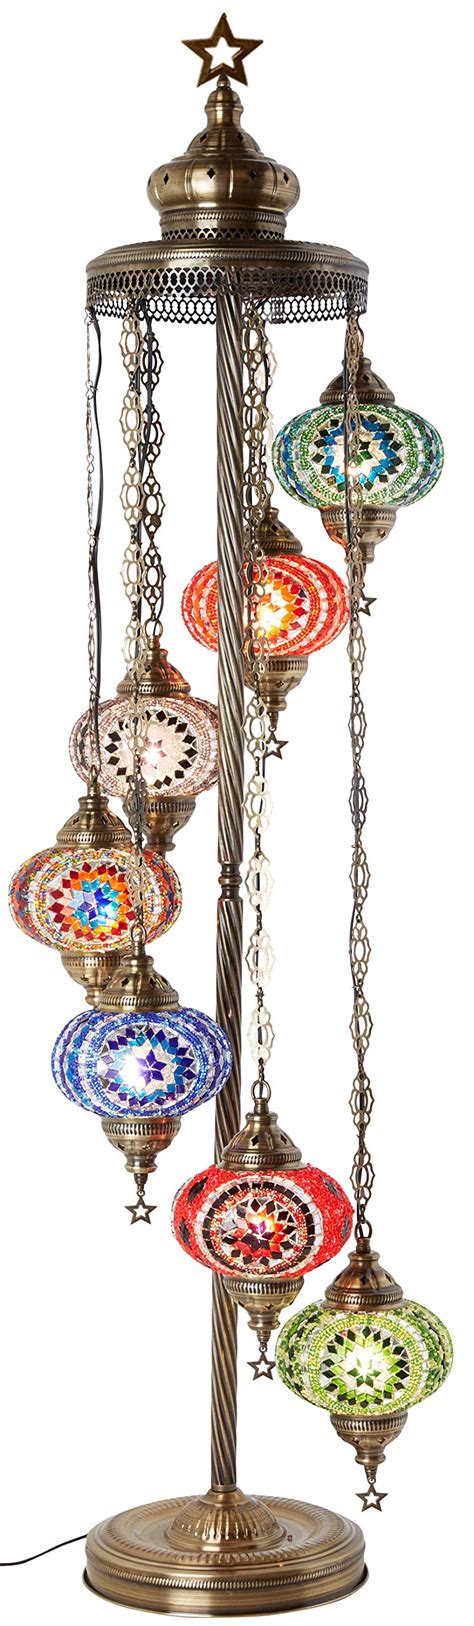 Buy Turkish Moroccan Mosaic Floor Lamp Light 7 Small Globes Online At